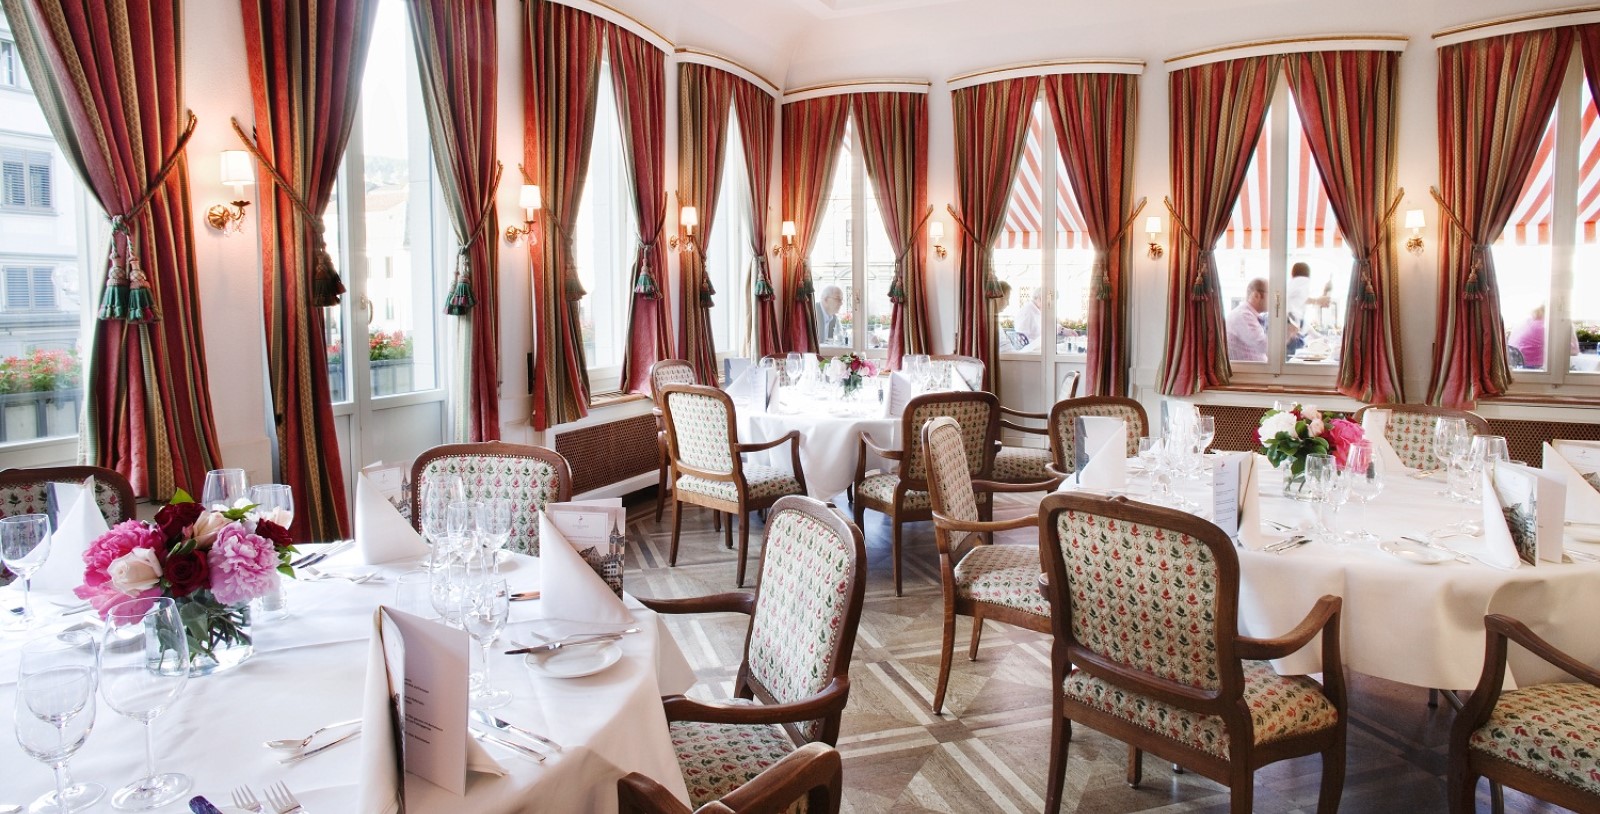 Image of Meeting Space with Banquet Seating Storchen Zürich - Lifestyle Boutique Hotel, 1357, Member of Historic Hotels Worldwide, in Zurich, Switzerland, Special Occasions